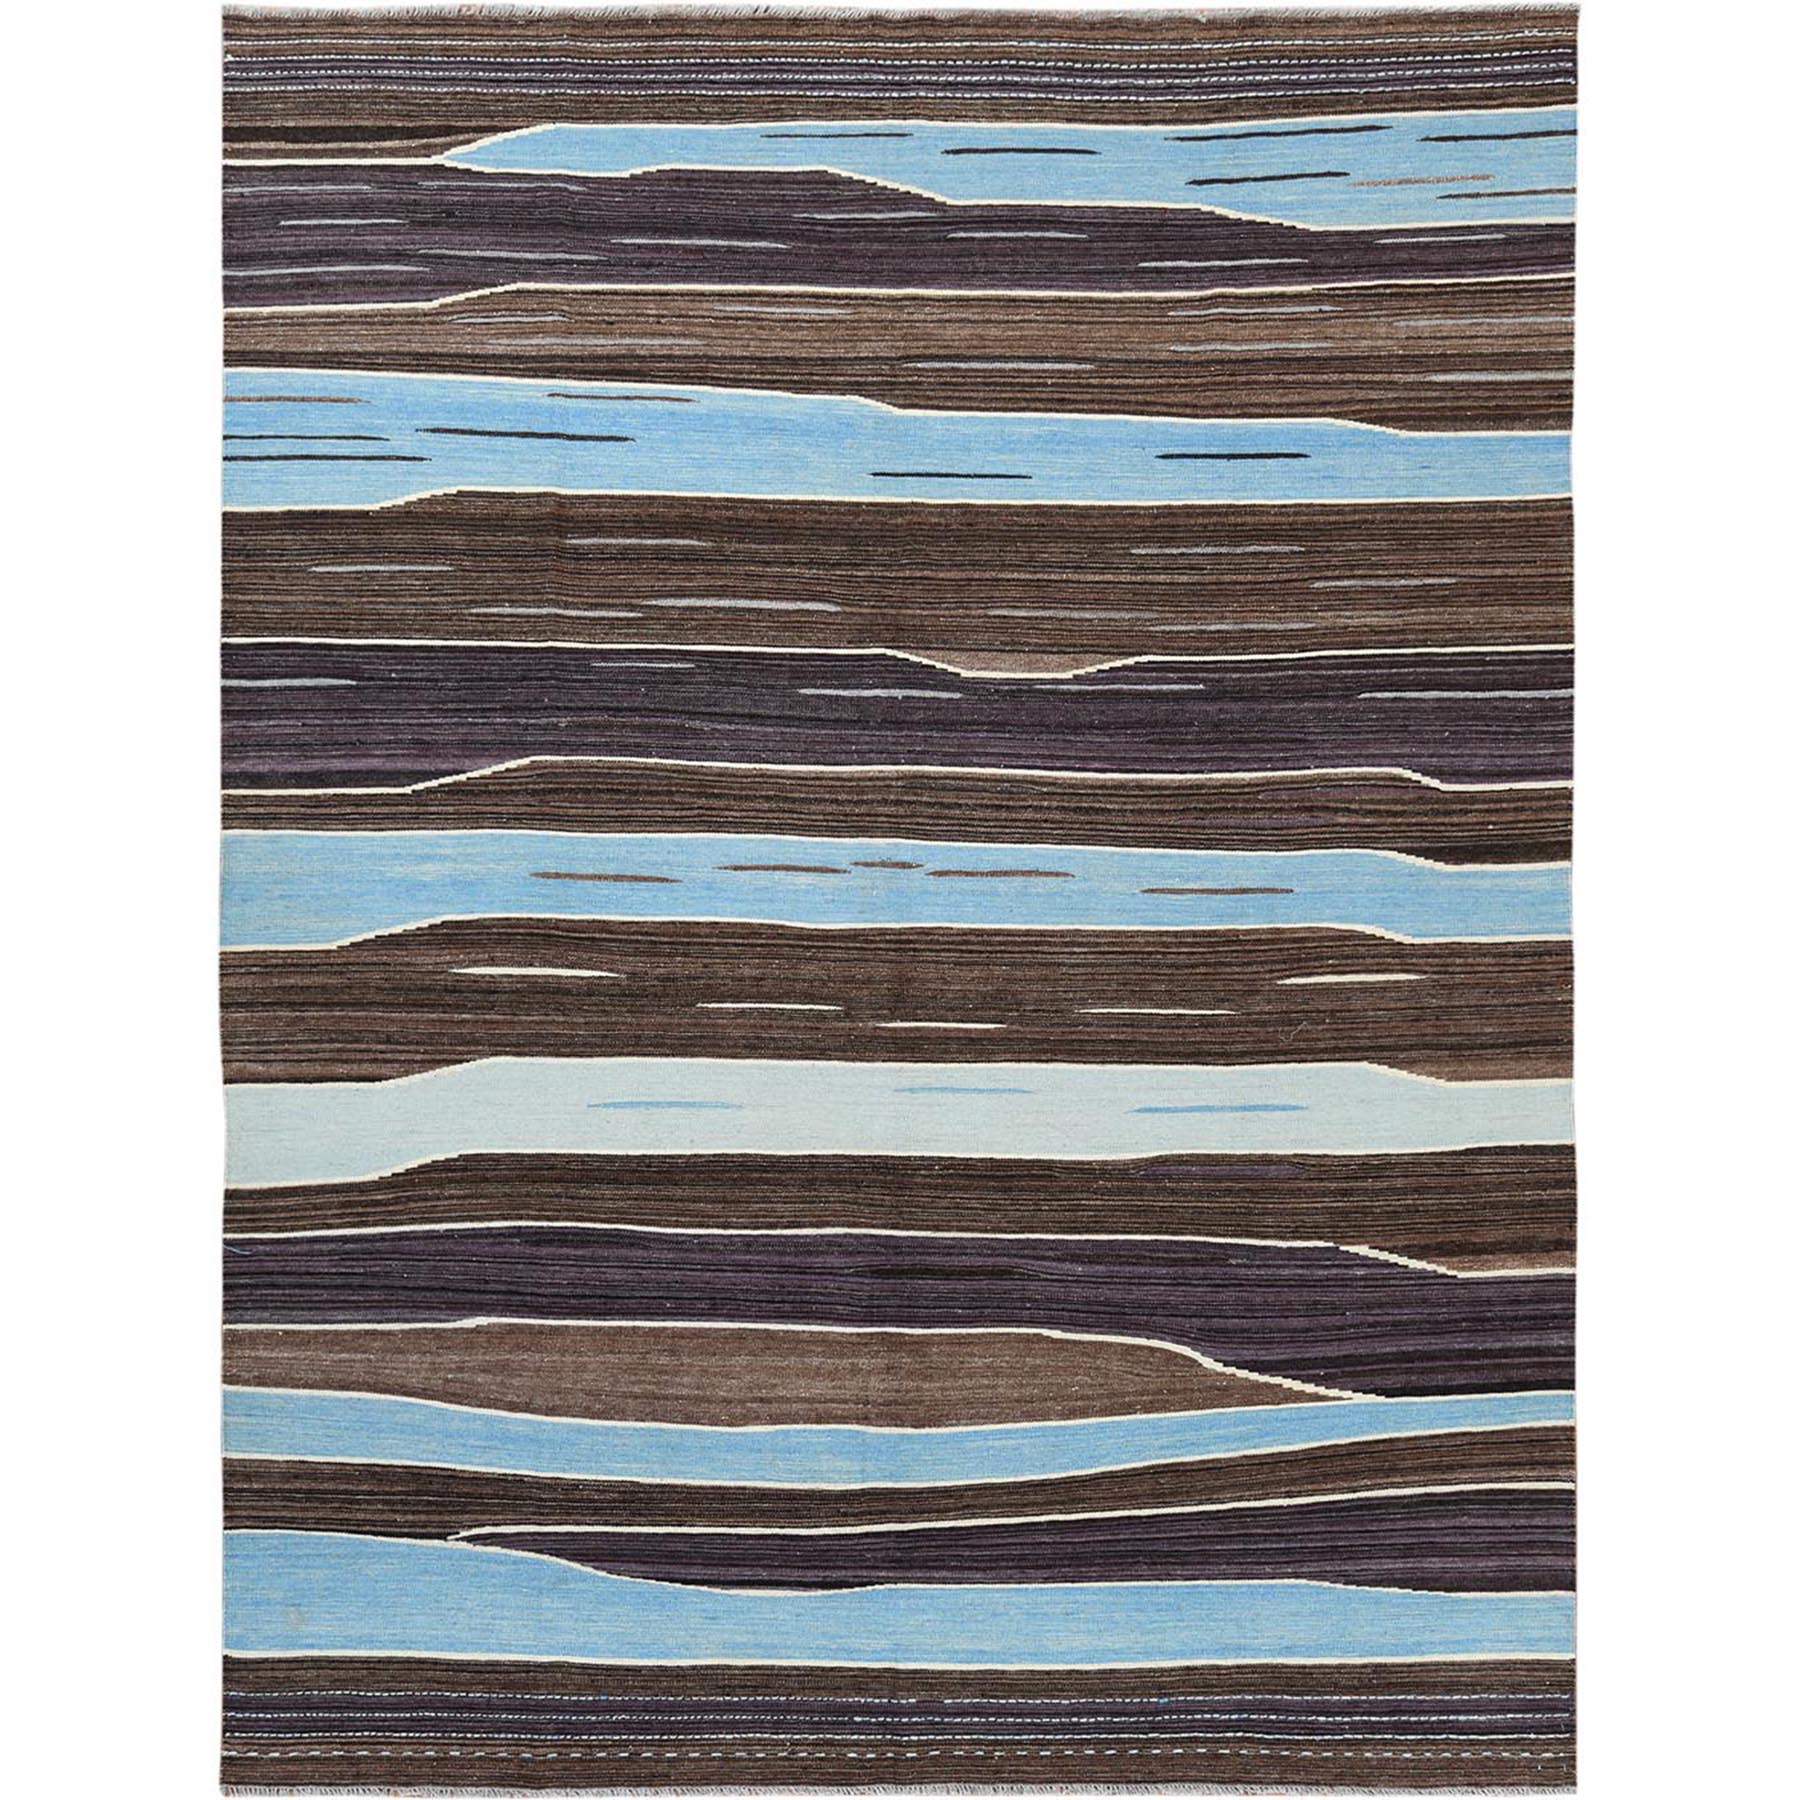 Modern & Contemporary Wool Hand-Woven Area Rug 8'3